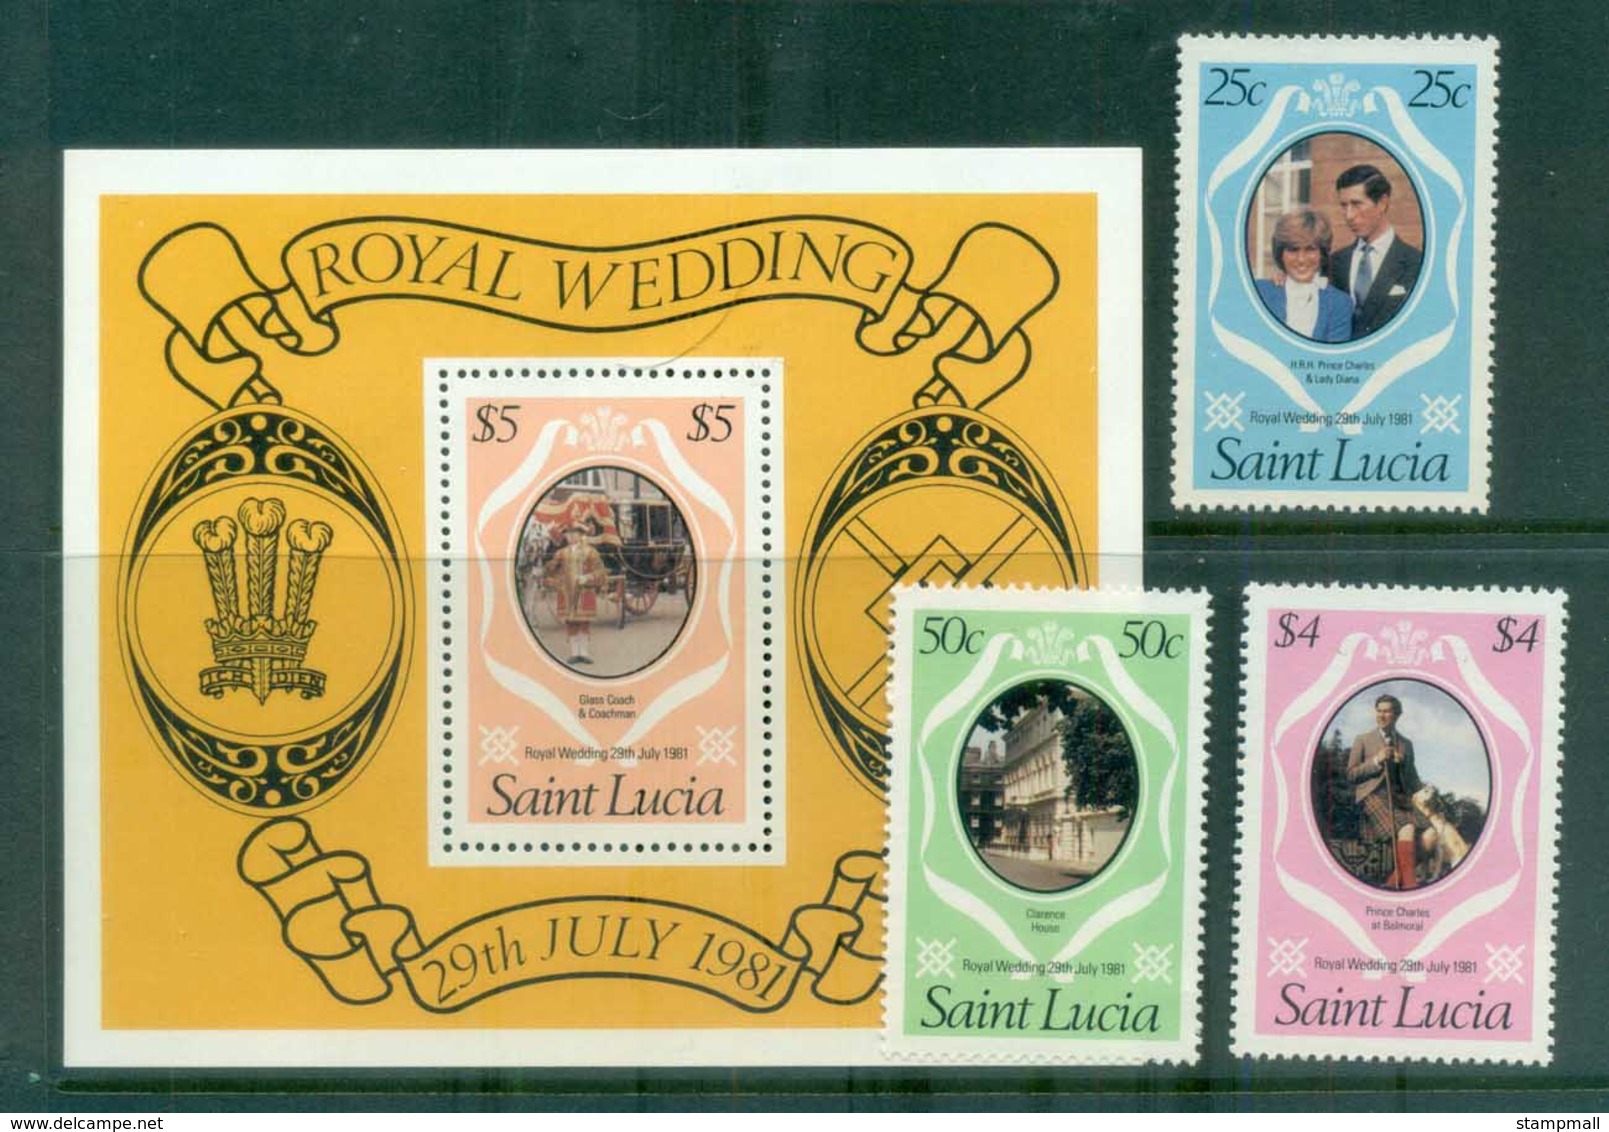 St Lucia 1981 Charles & Diana Royal Wedding + MS MUH Lot81875 - St.Lucia (1979-...)